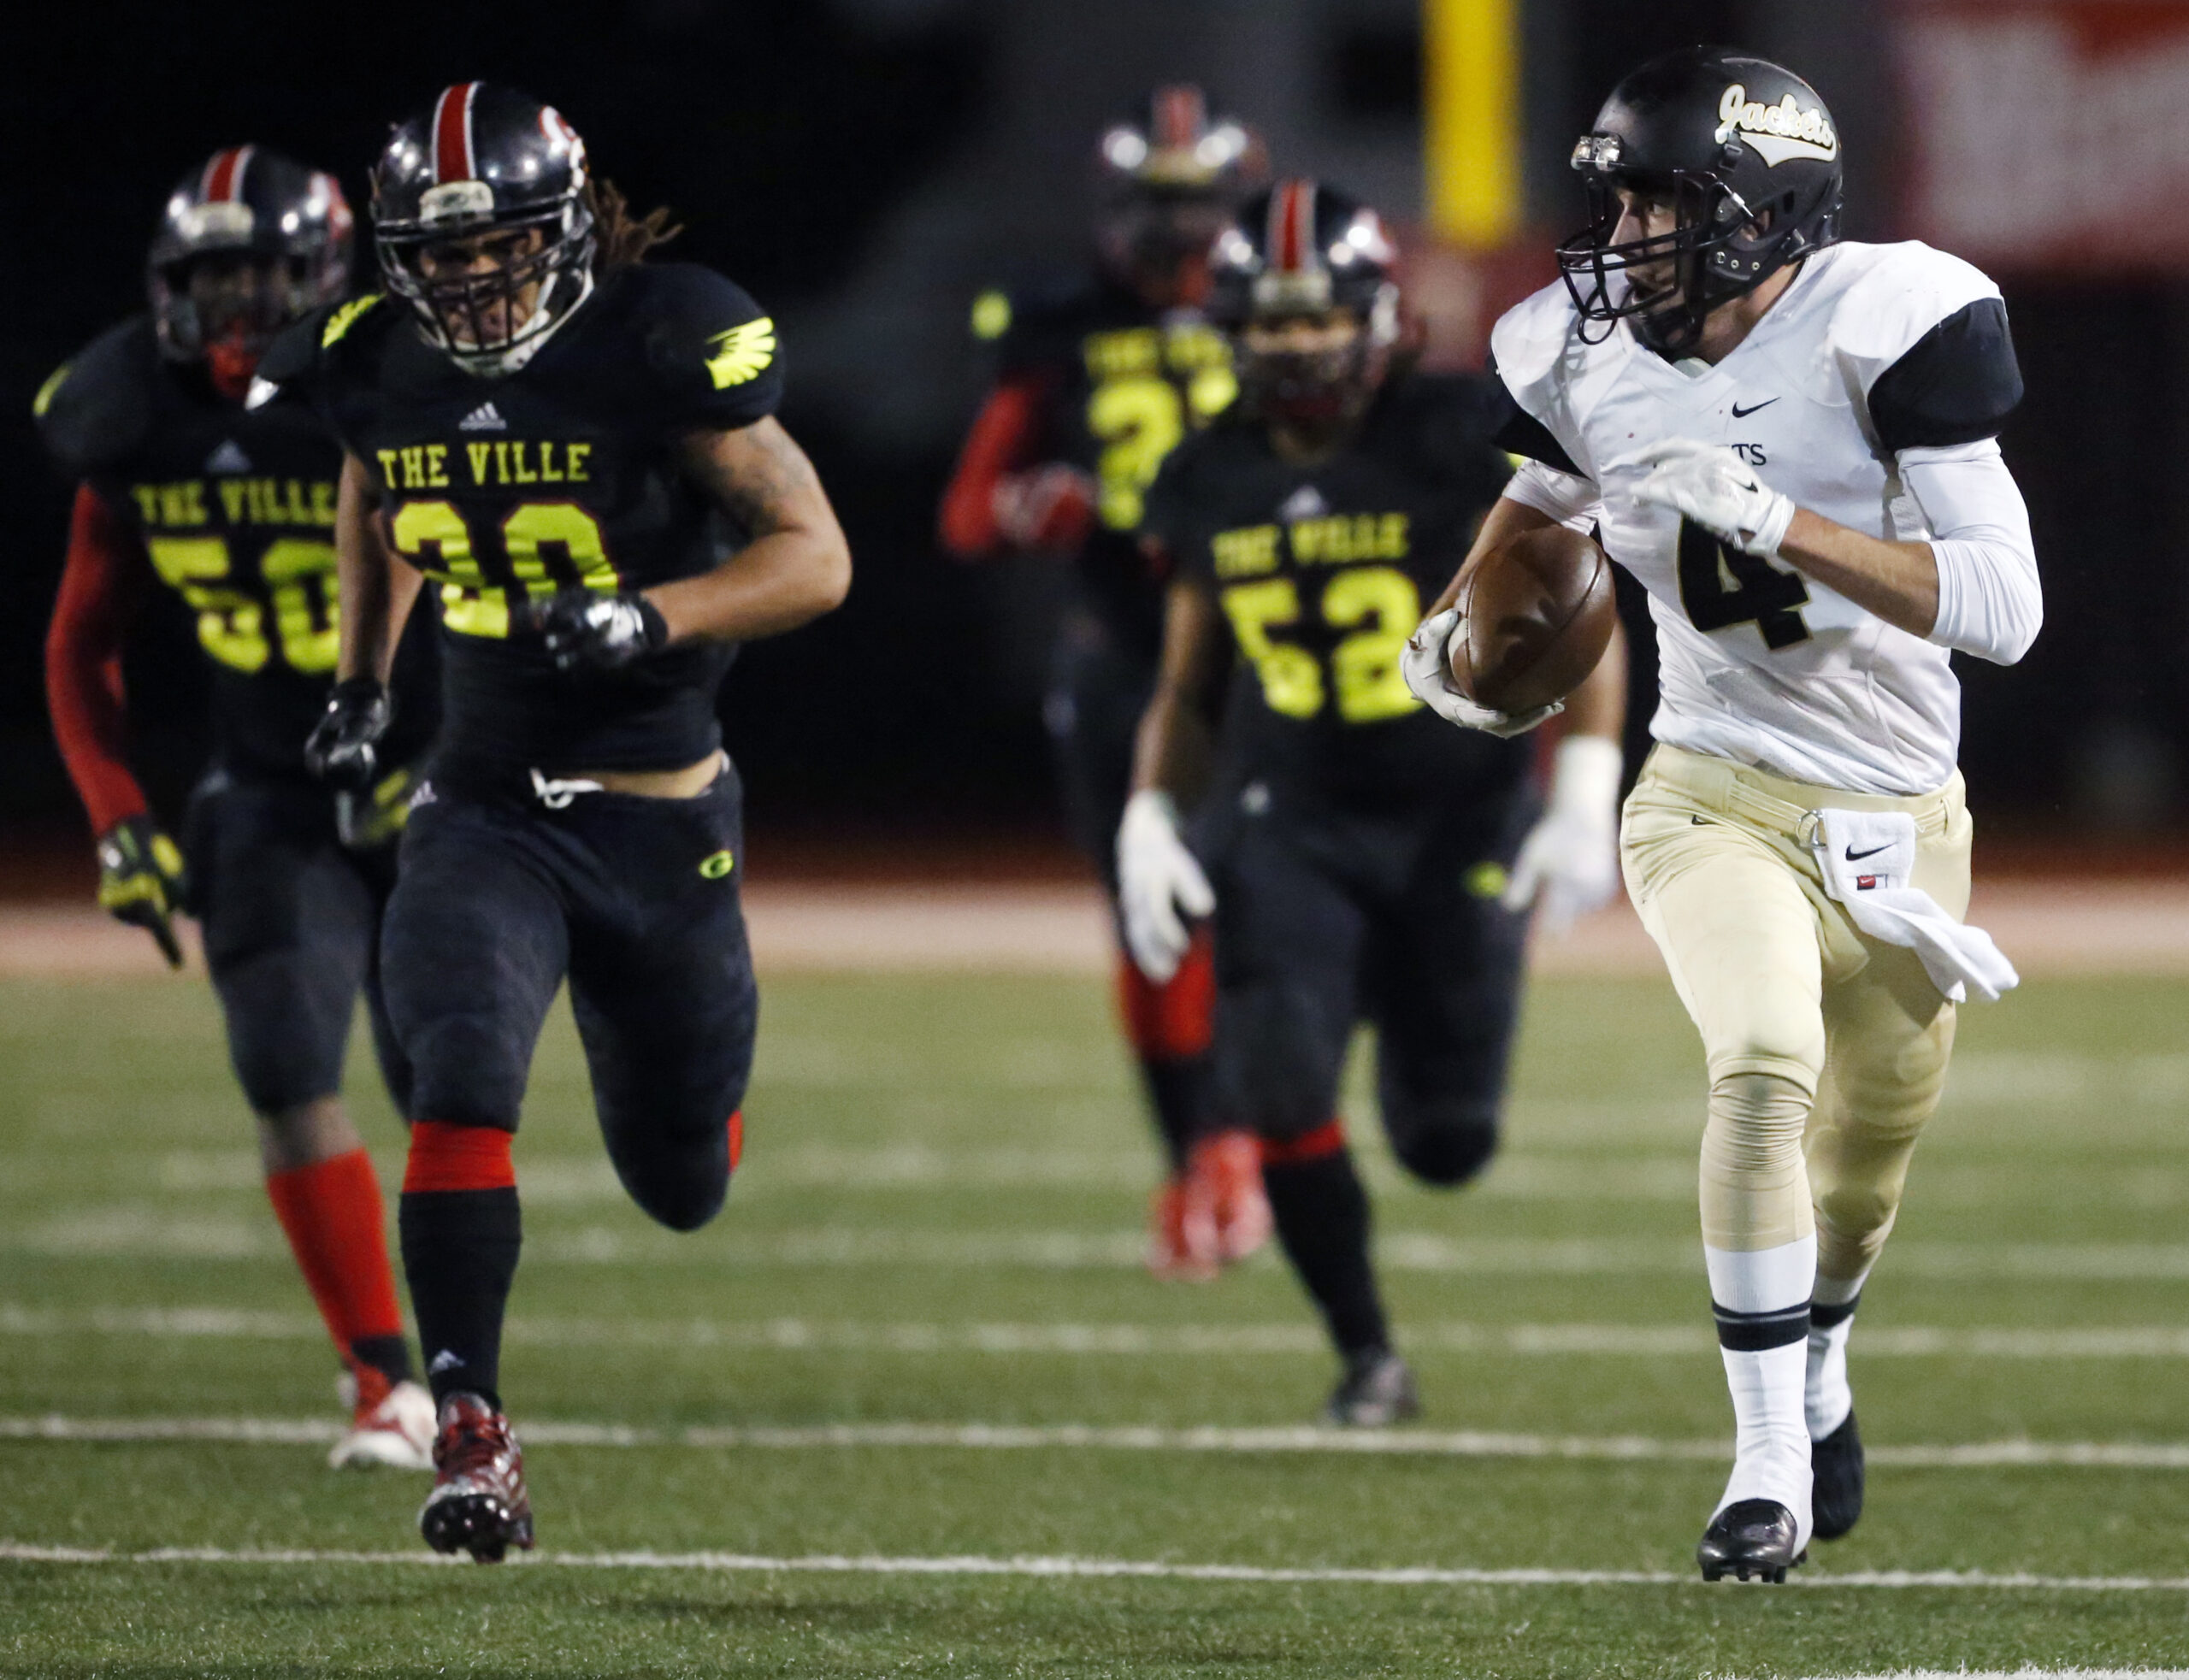 Jackets pound Glenville, move on to state semi-finals